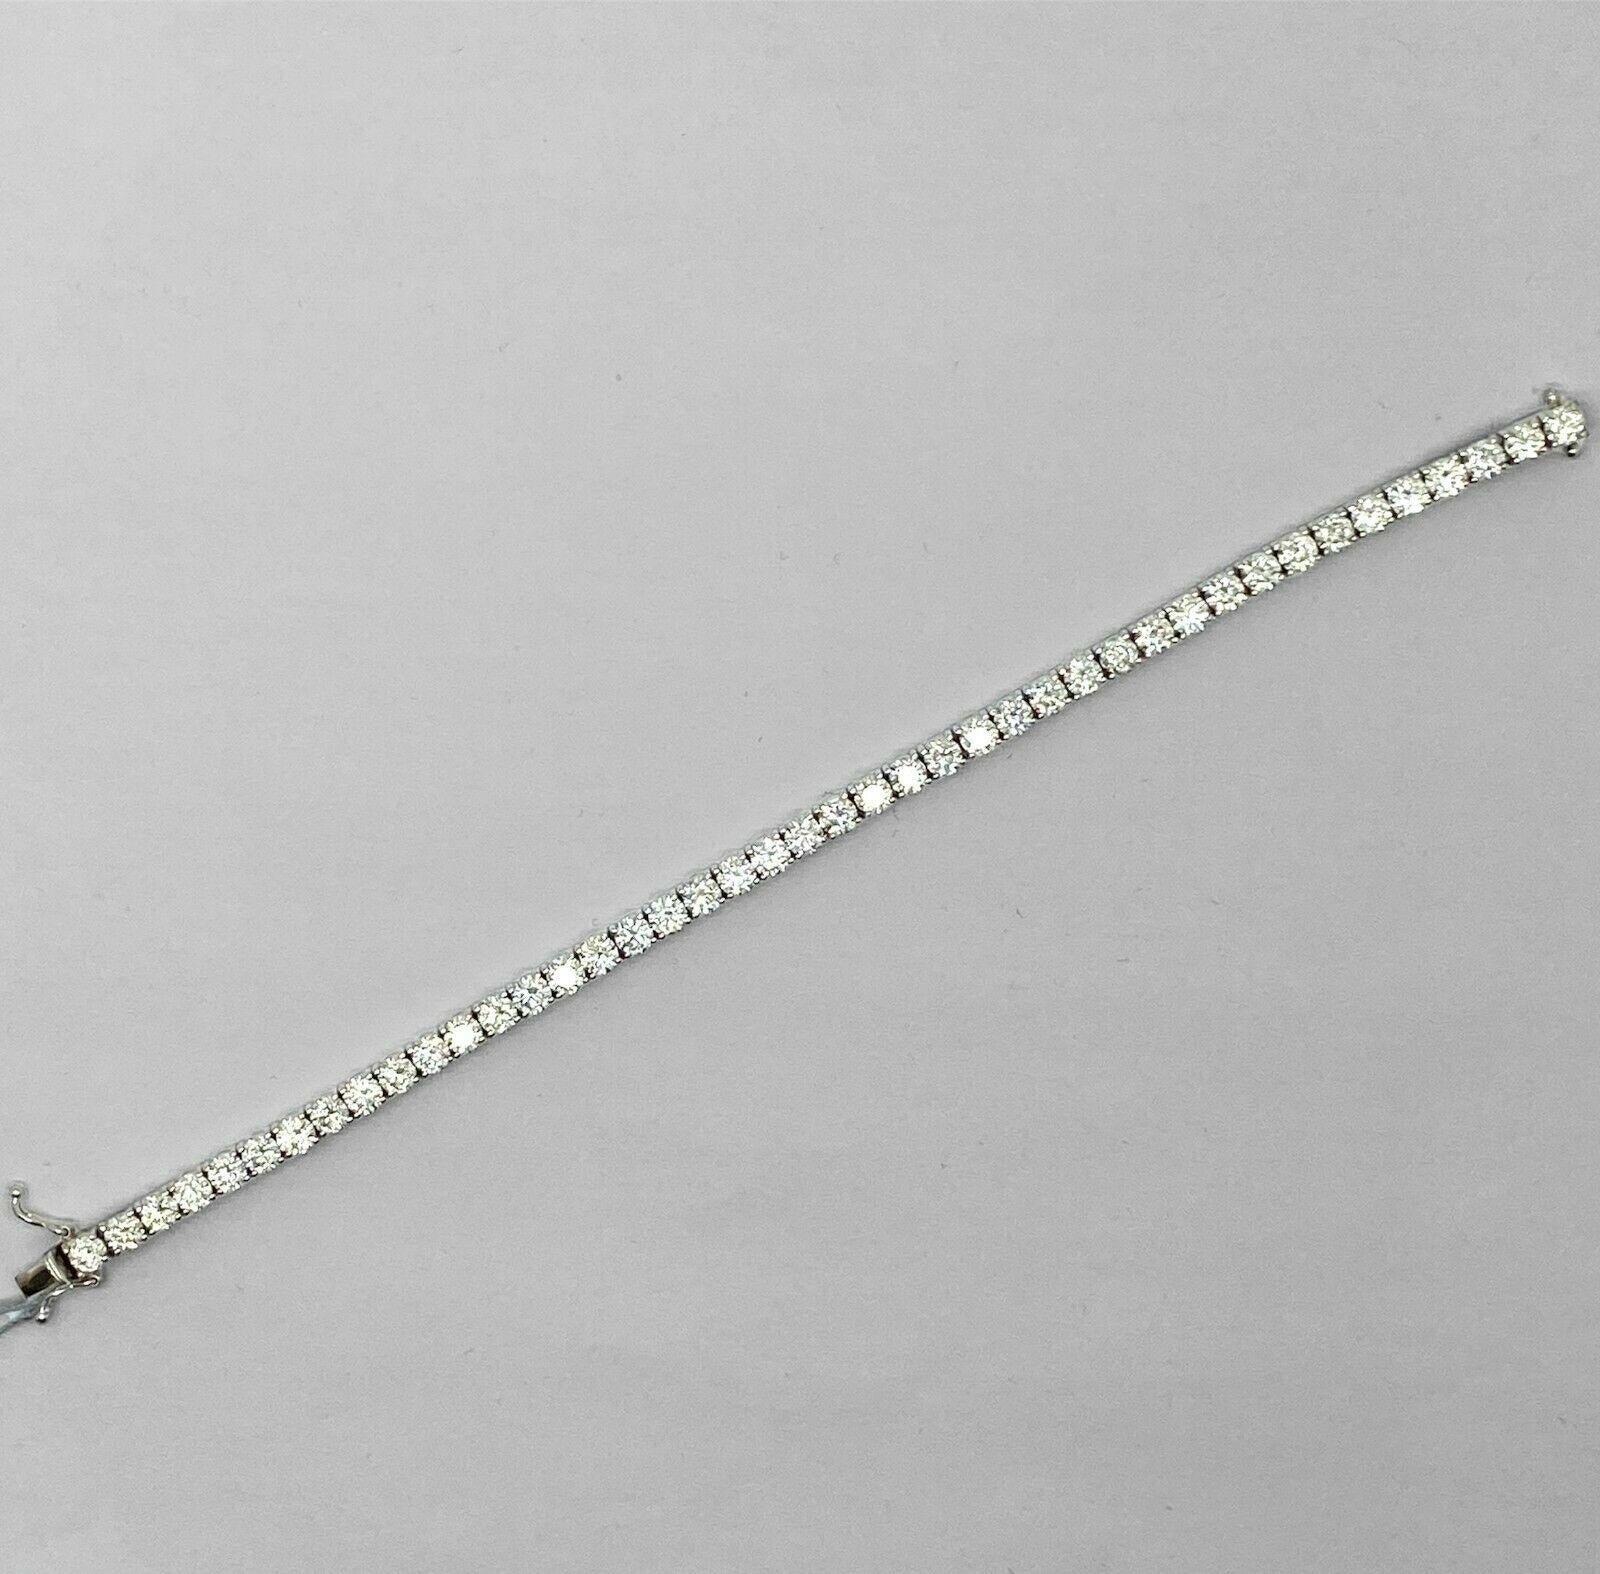 Specifications:
    main stone:ROUND DIAMONDS
    diamonds:43 PCS
    carat total weight:approximately 10.28 CTW
    color:H
    clarity:VS
    brand:CUSTOM MADE
    metal:14K WHITE gold
    type:BRACELET
    weight:10.11 gr
    LENGHT:7 INCH
   